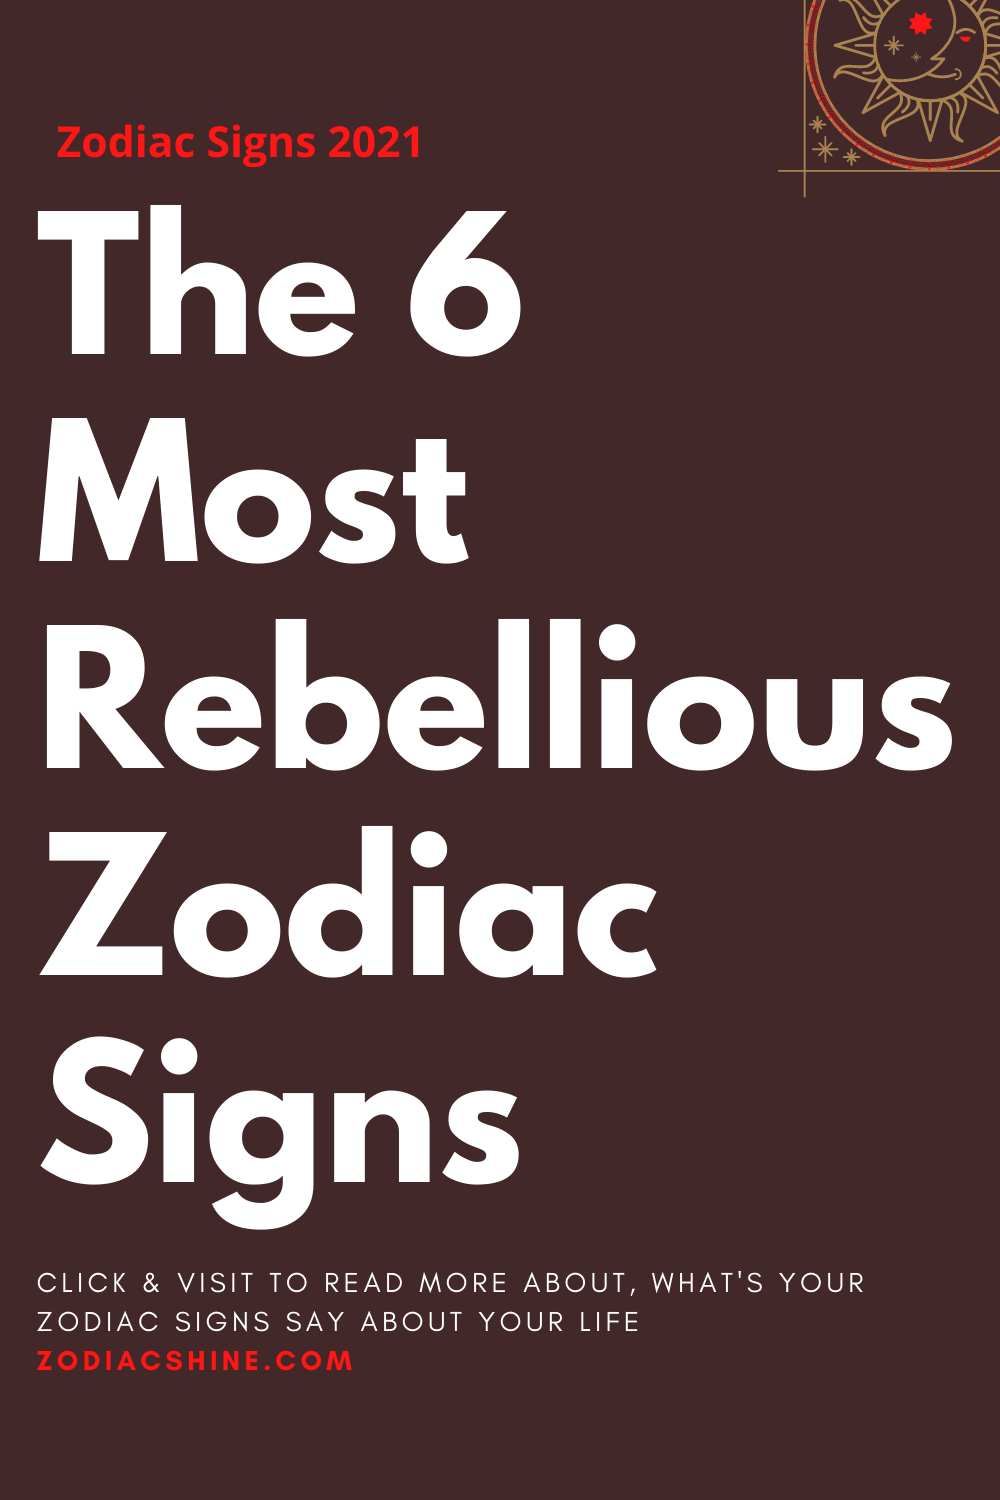 The 6 Most Rebellious Zodiac Signs